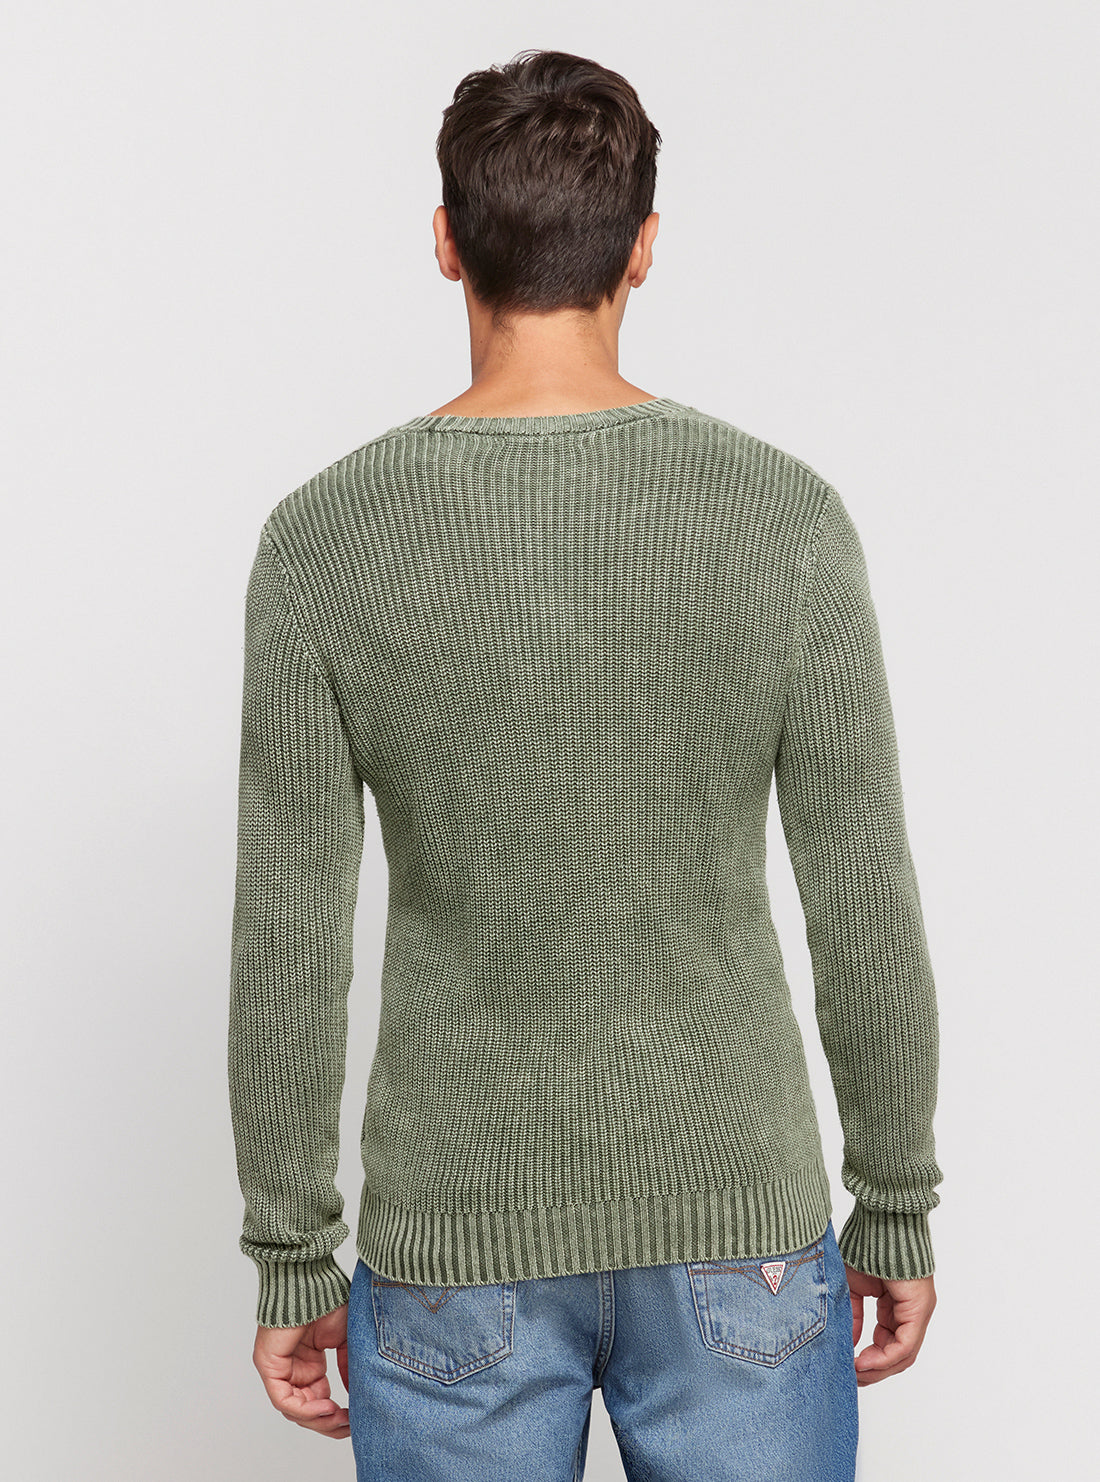 GUESS Green Bleach Angus Sailor Ribbed Sweater back view